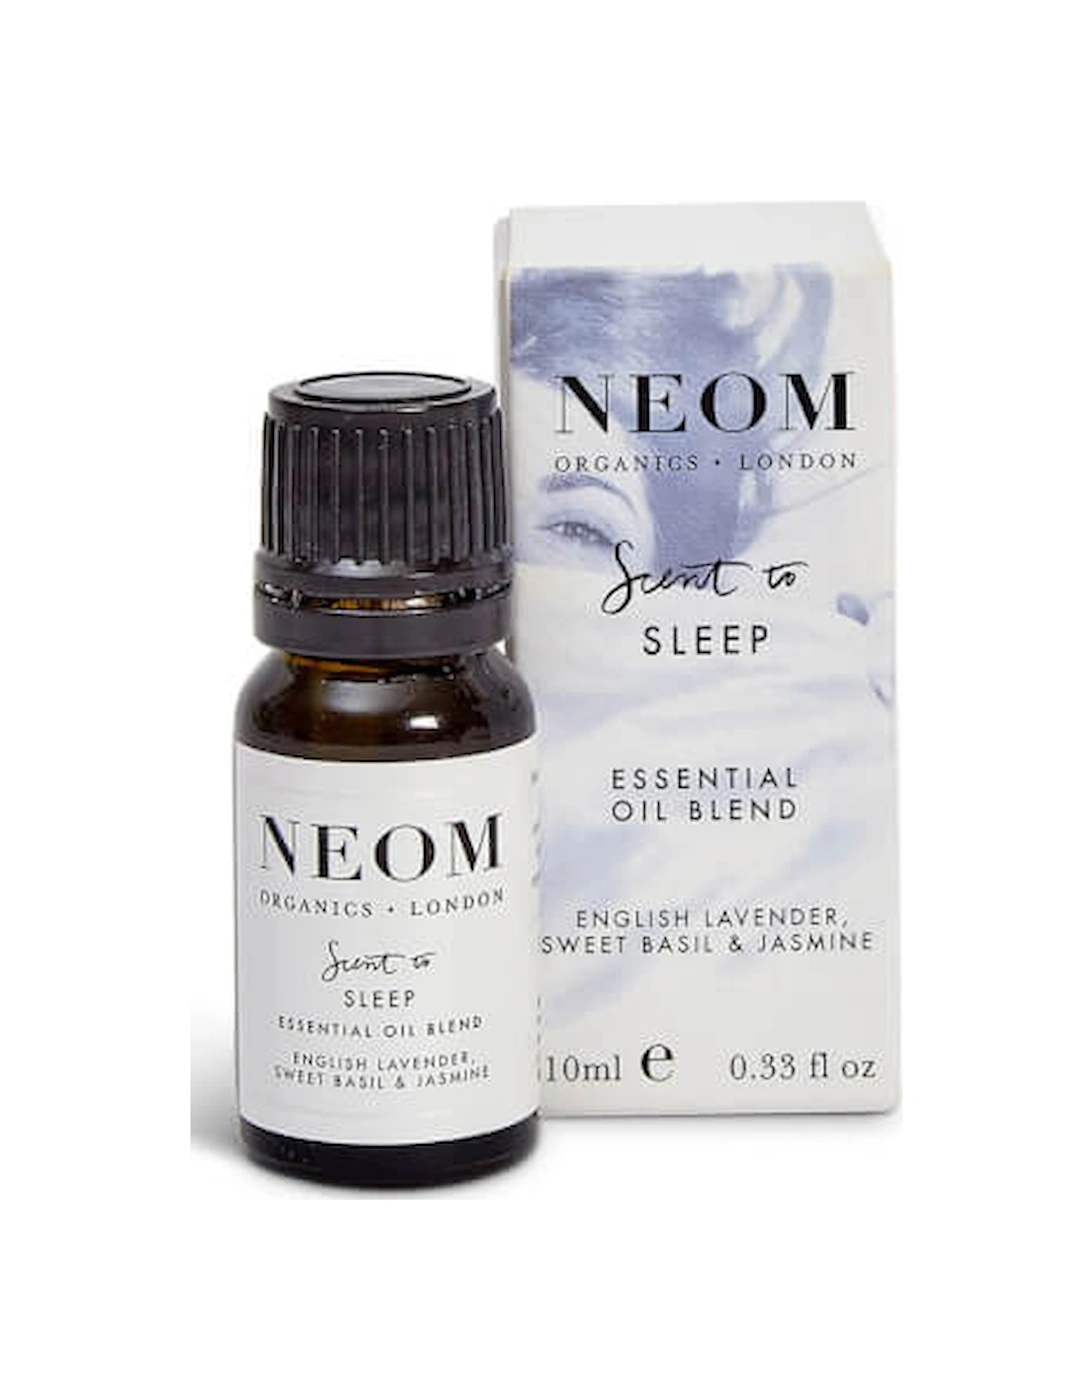 Scent to Sleep Essential Oil Blend 10ml - NEOM, 2 of 1